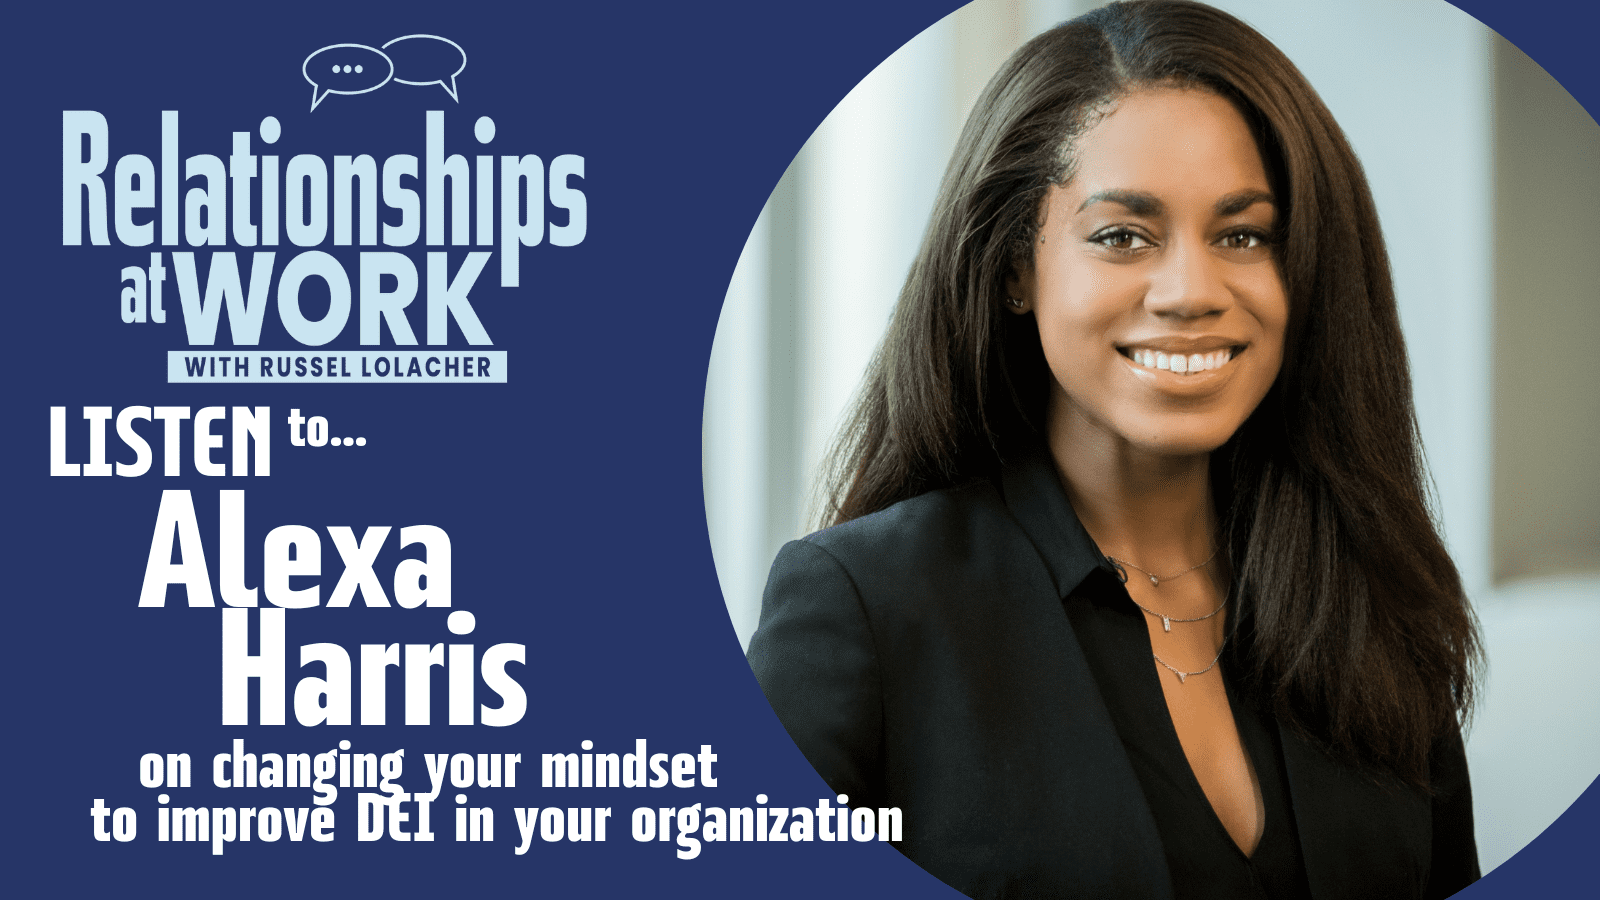 Alexa Harris Helps Us Change Our Mindset To Improve DEI in the Workplace